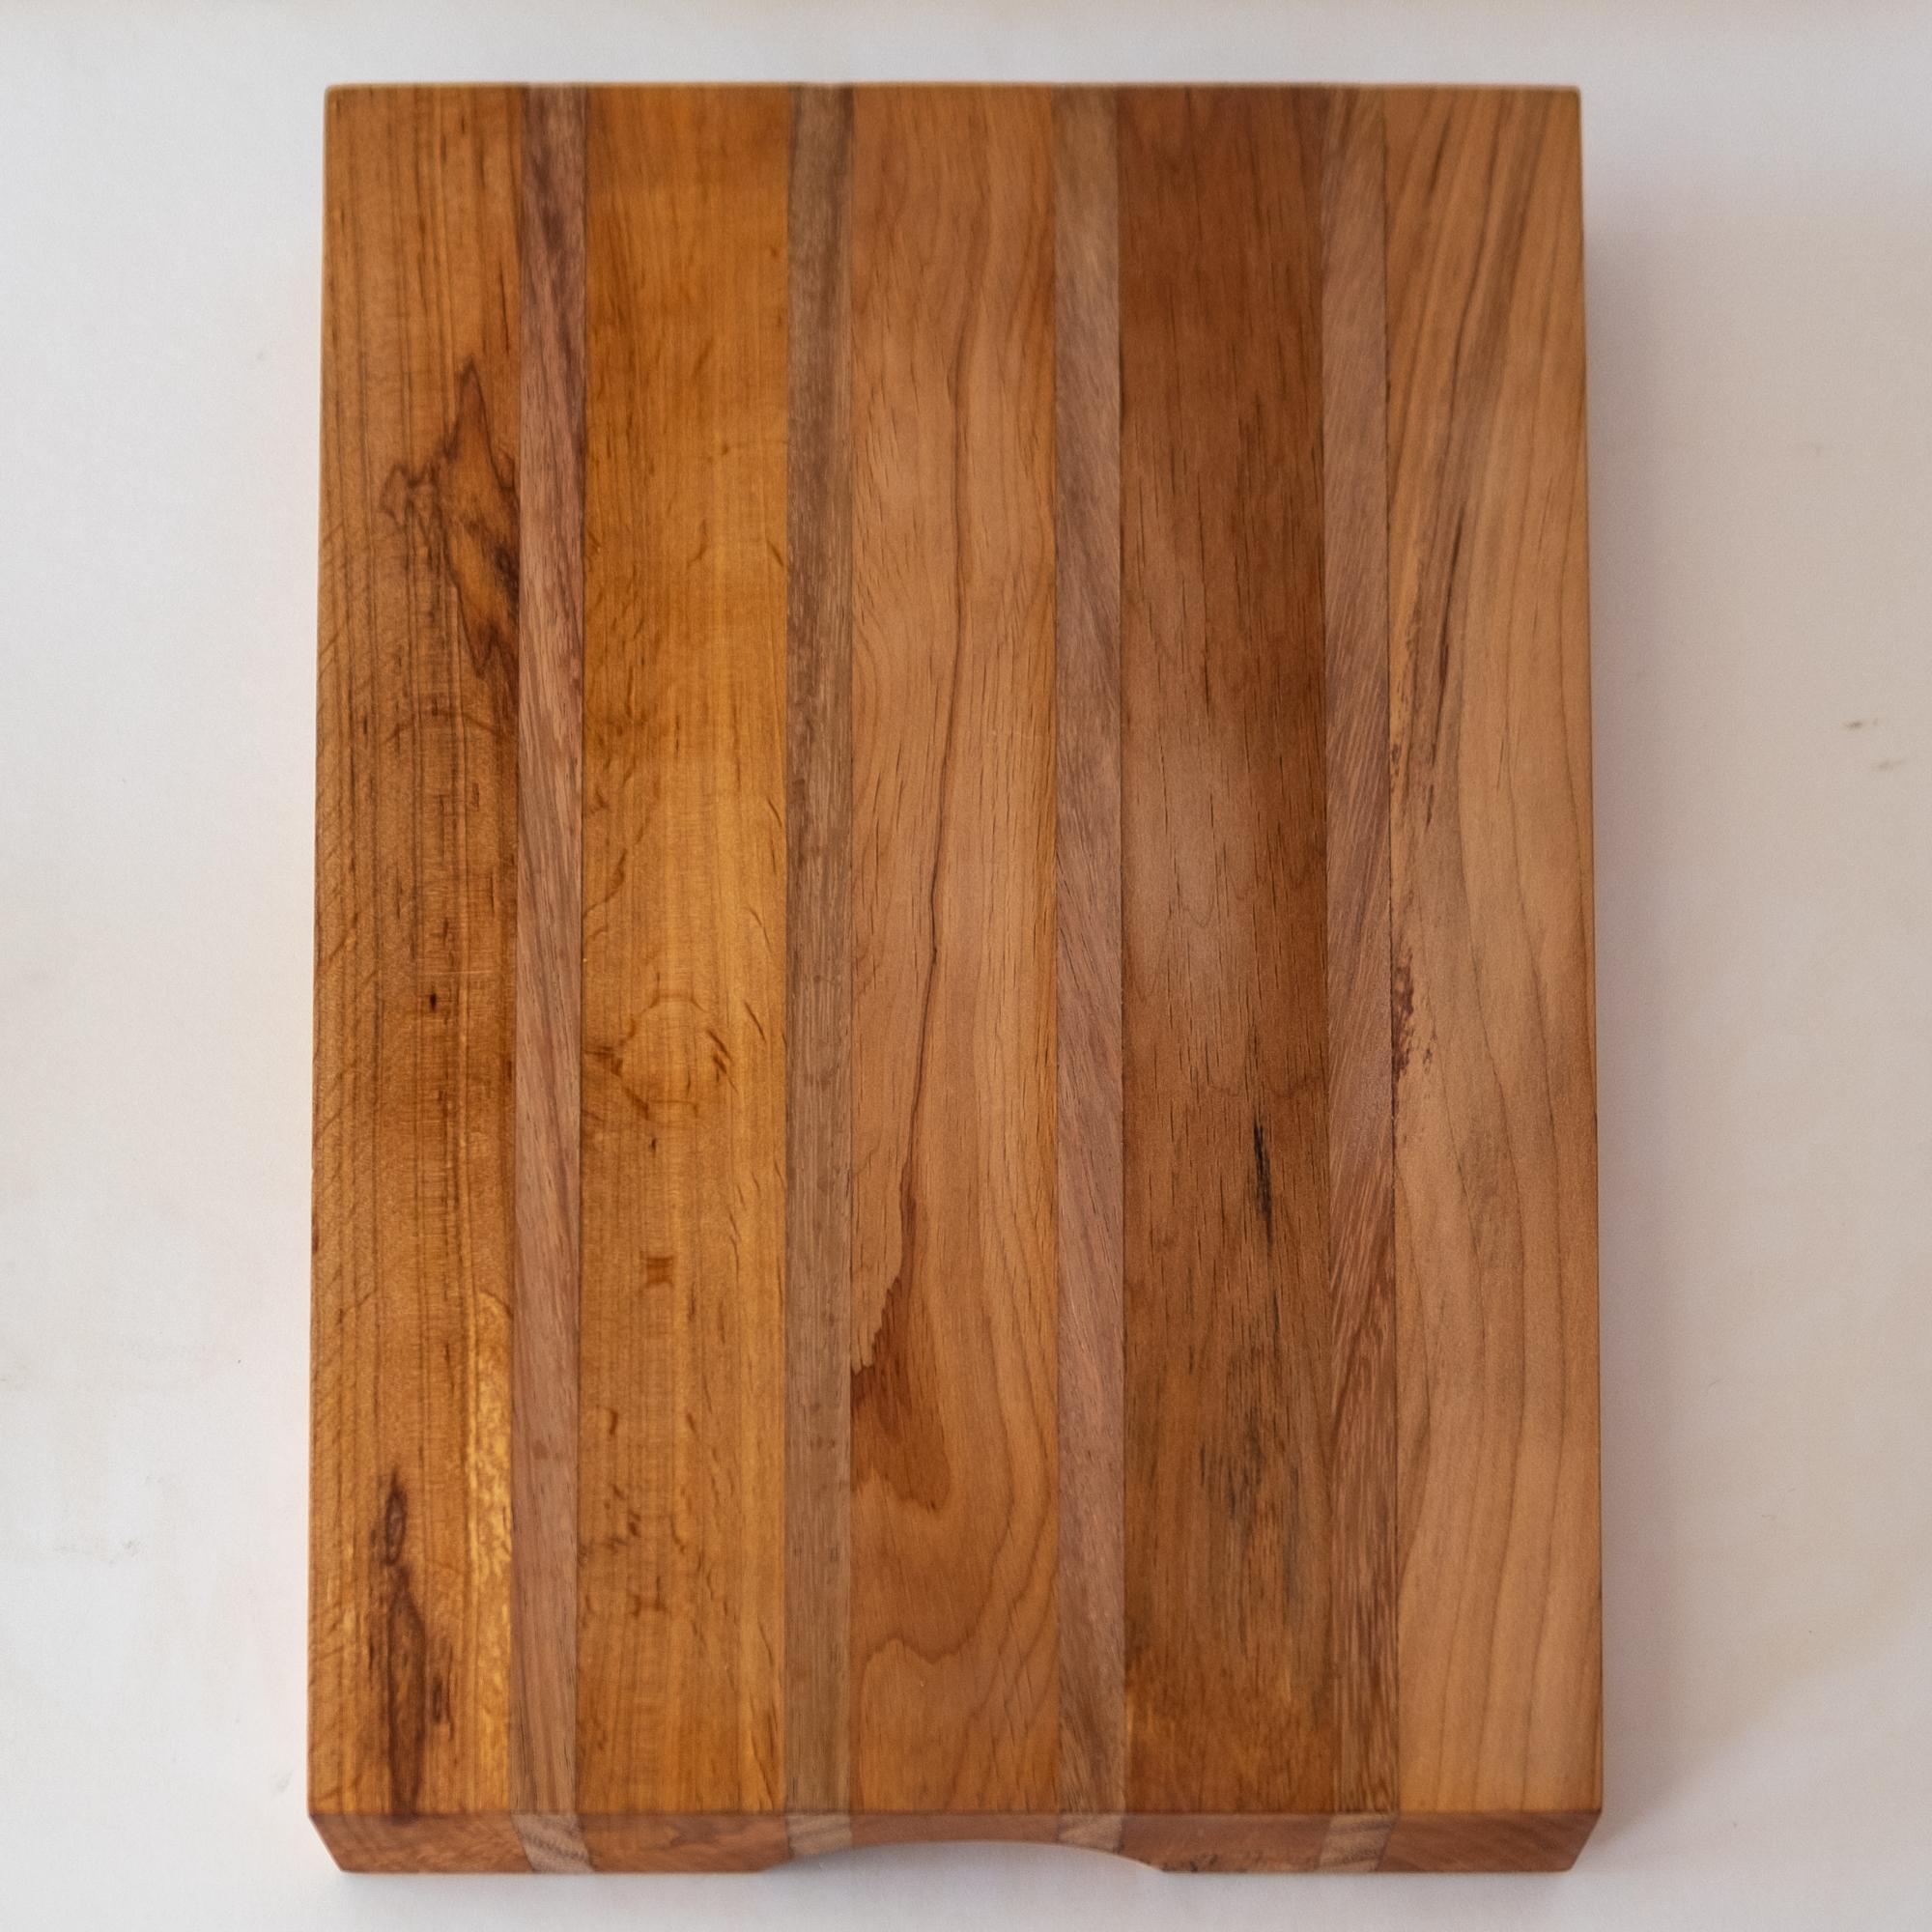 Unused mixed wood cutting board or serving tray by Mexican Modernist Don Shoemaker. Retains original labels from his workshop in Señal Mexico.